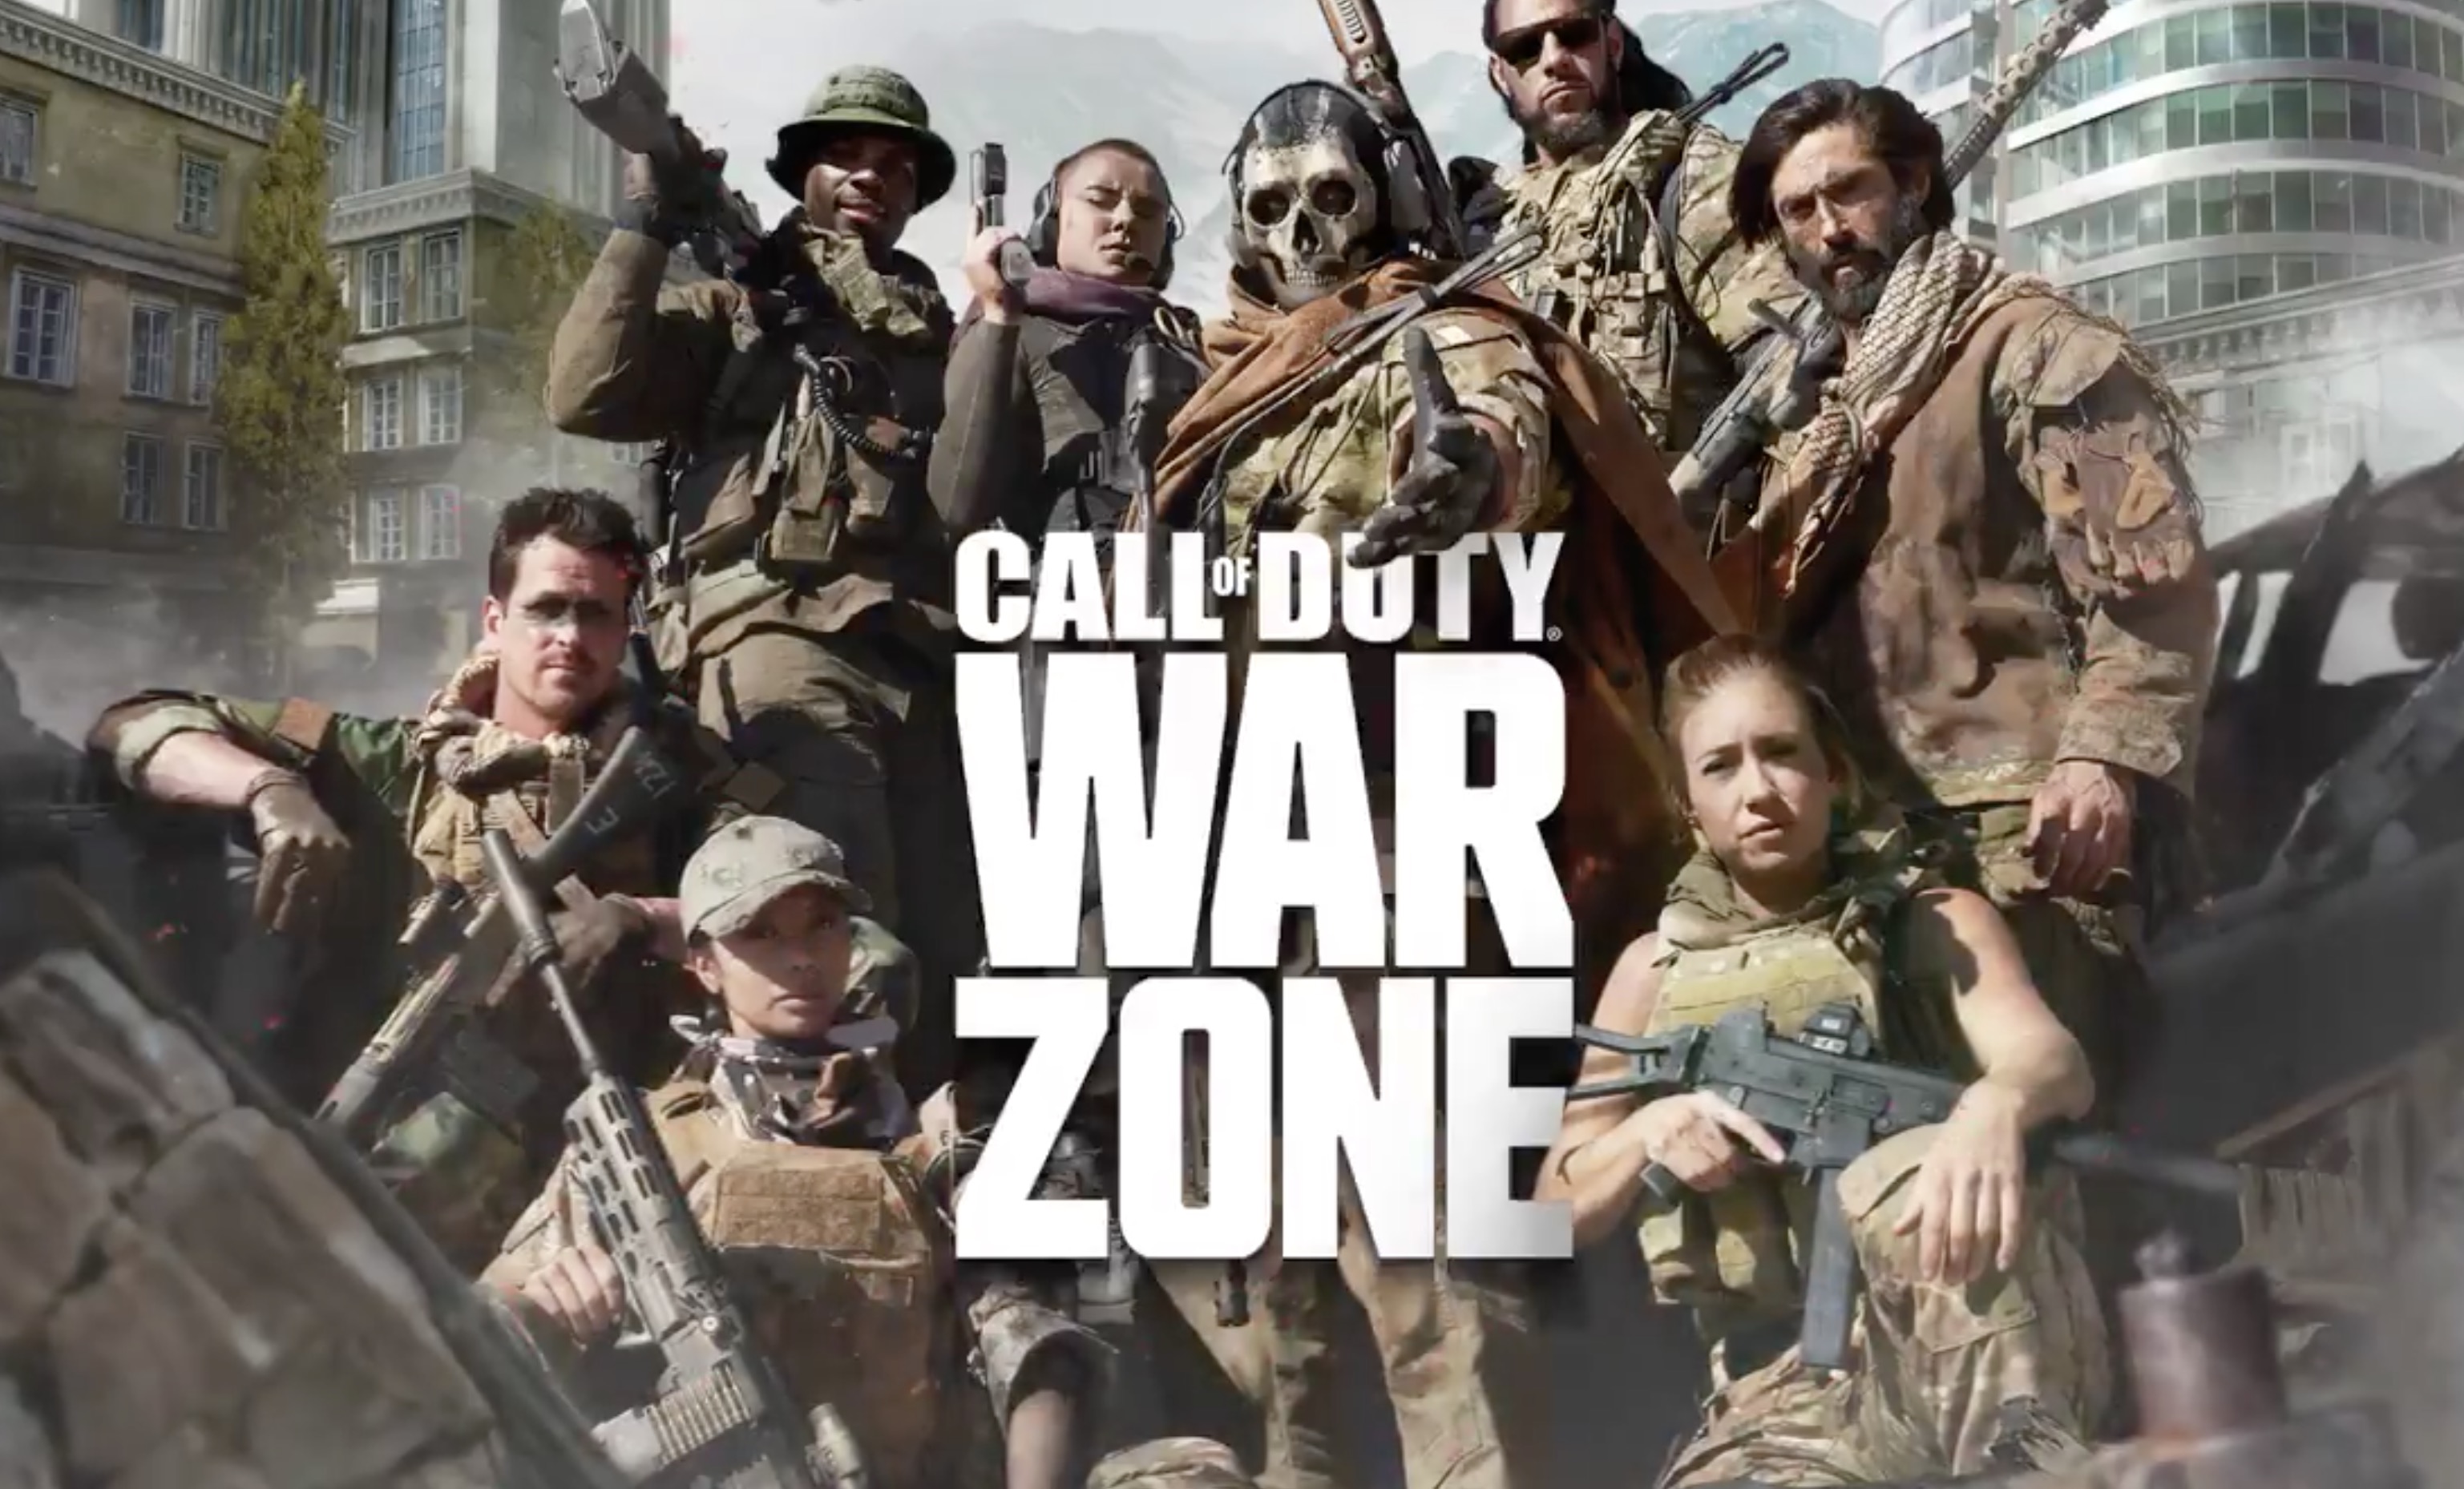 Call of duty warzone mobile на телефон. Call of Duty Warzone. Call of Duty Modern Warfare Warzone. Warzone Call of Duty Art. Call of Duty Warzone 2.